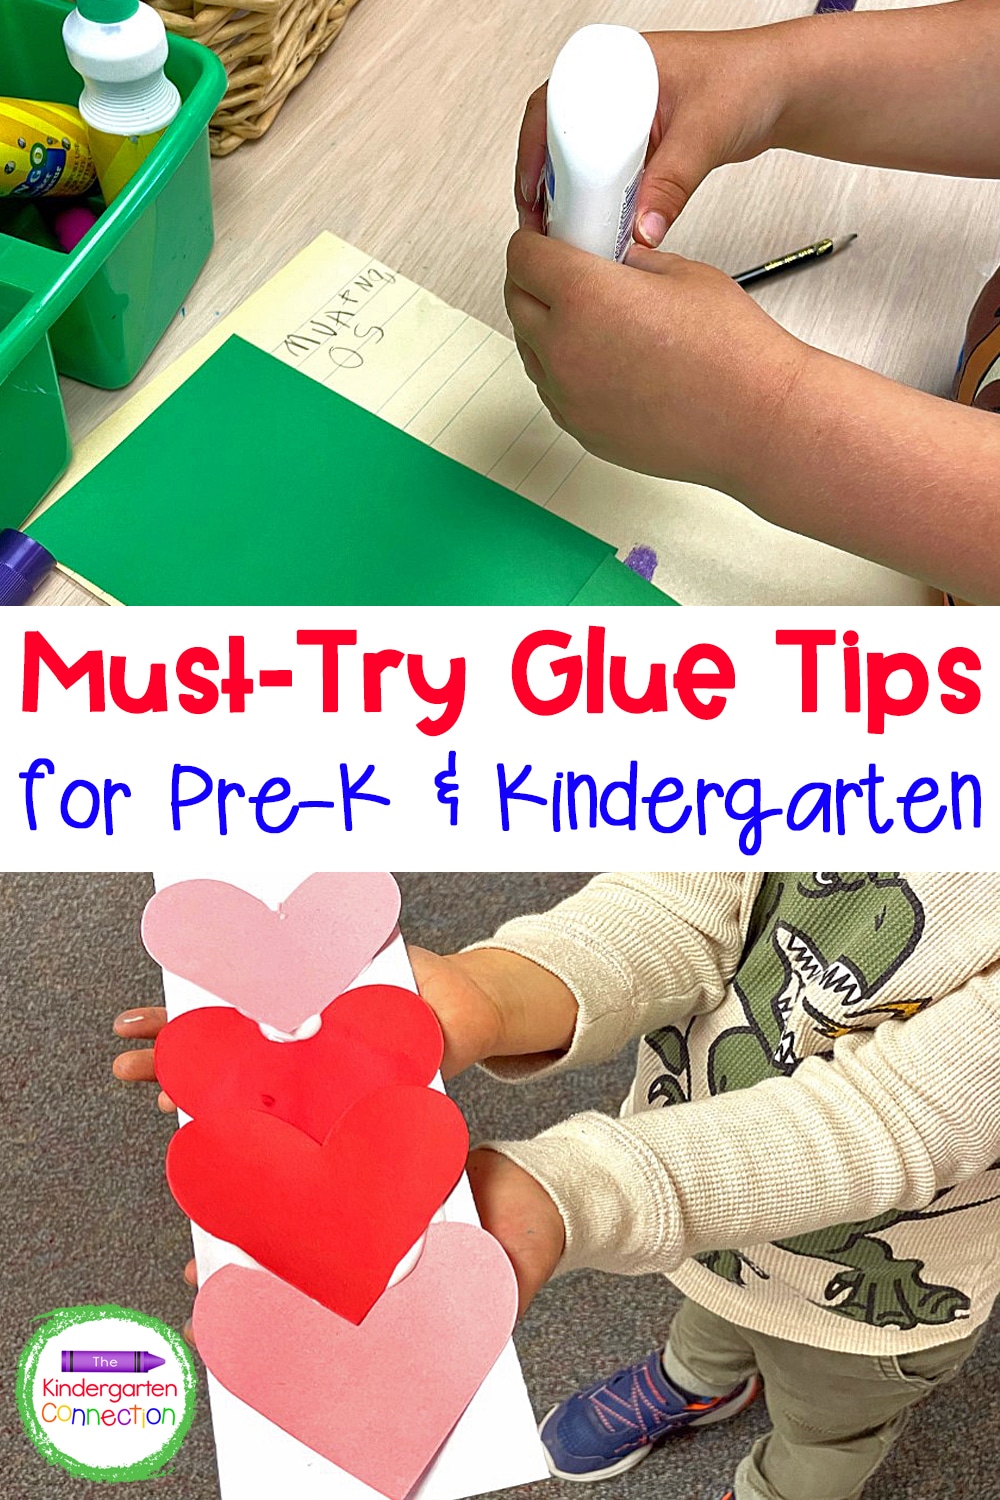 These Must-Try Glue Practice Tips for Pre-K & Kindergarten are sure to help your students strengthen skills and save you stress along the way!